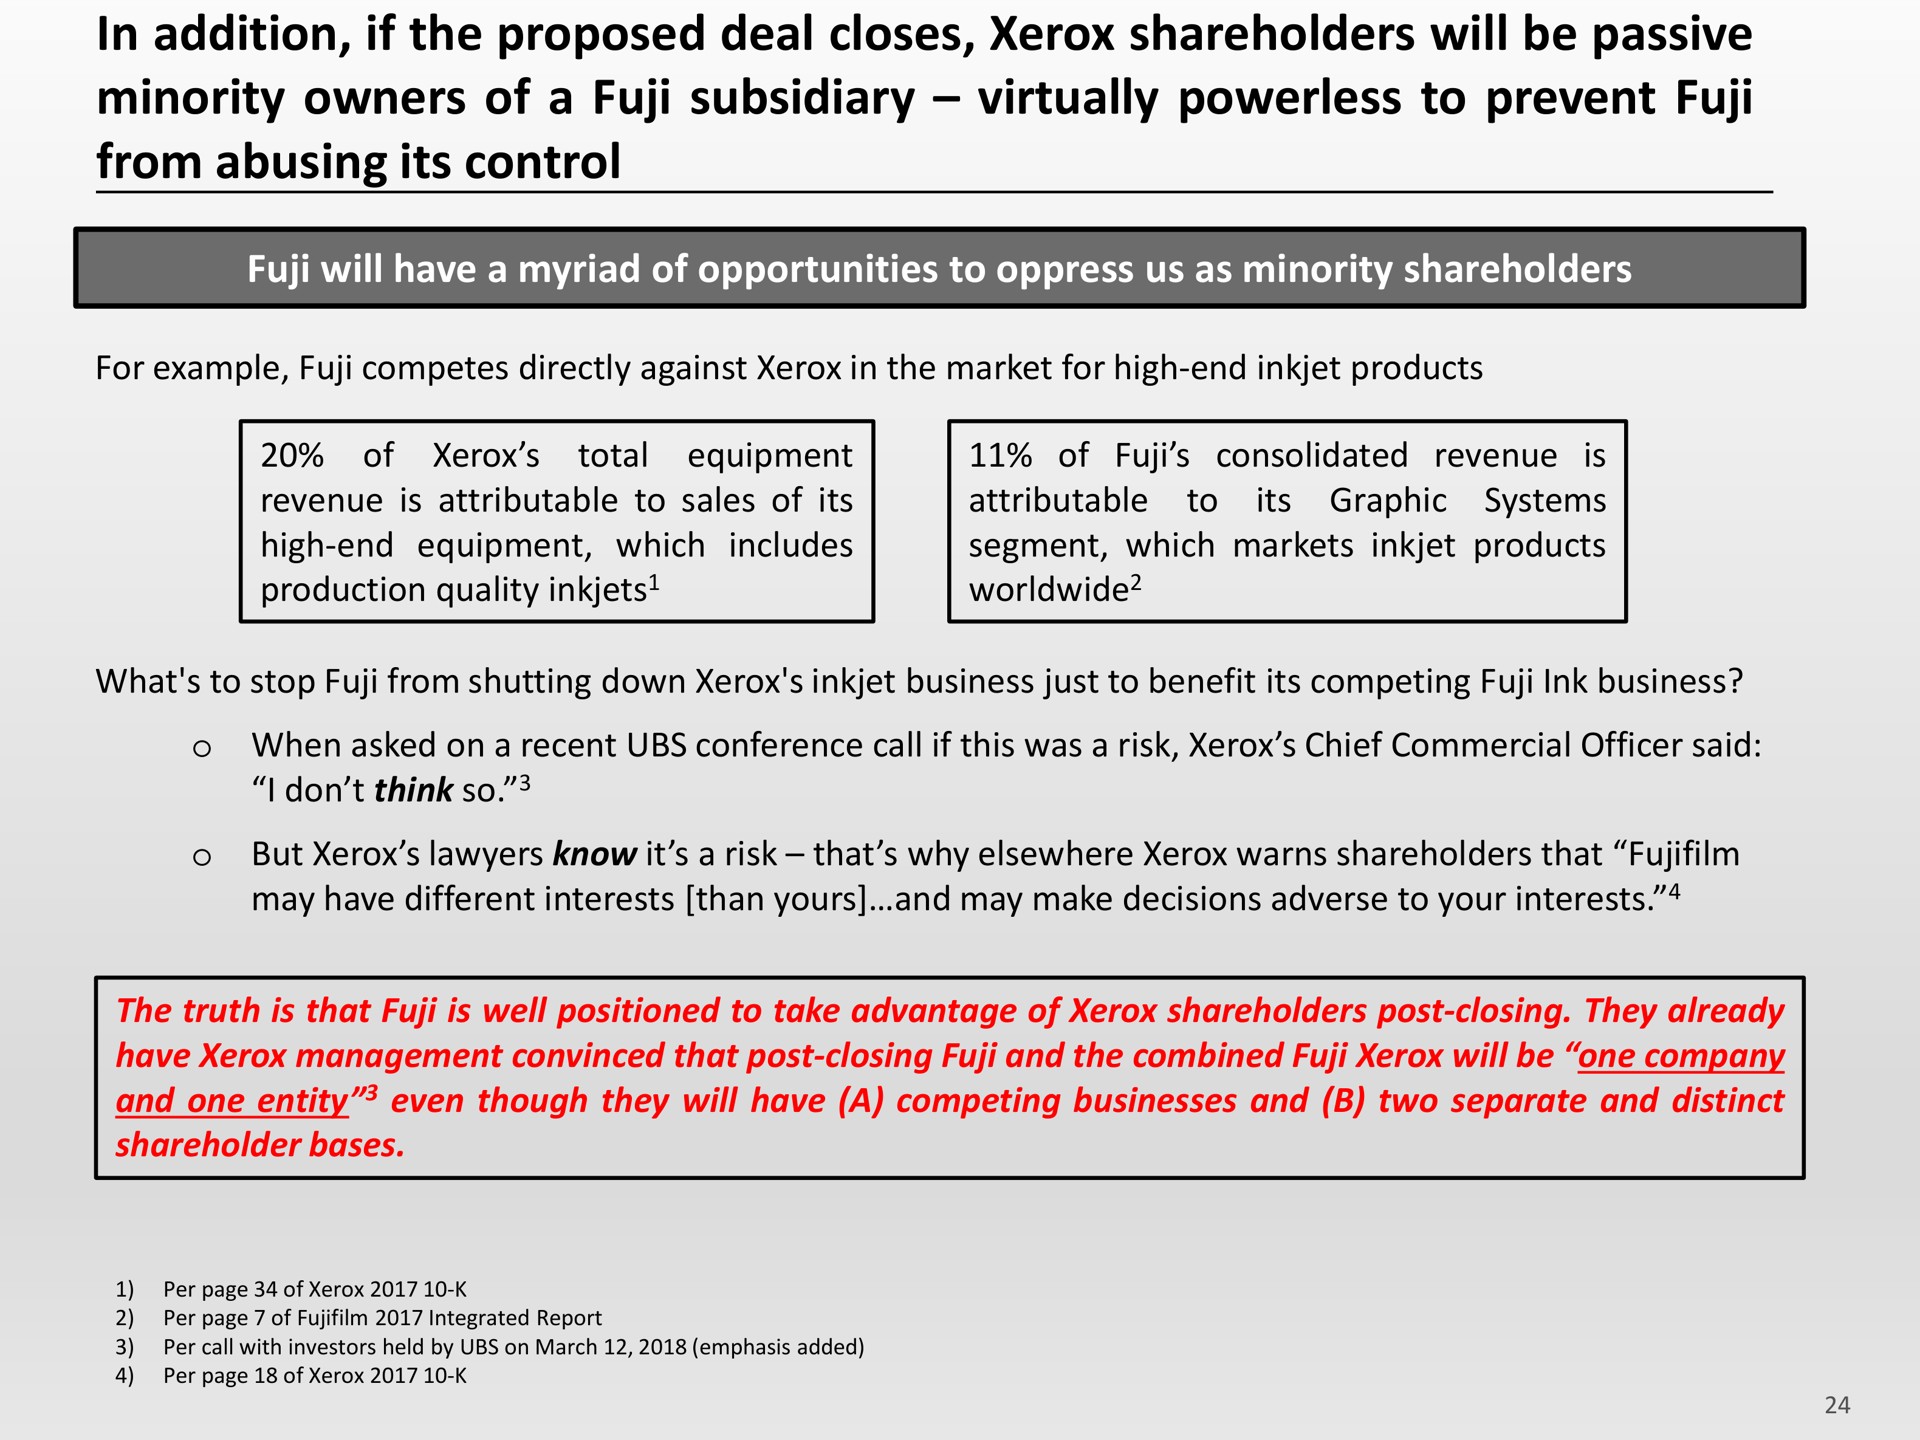 in addition if the proposed deal closes shareholders will be passive minority owners of a fuji subsidiary virtually powerless to prevent fuji from abusing its control | Icahn Enterprises